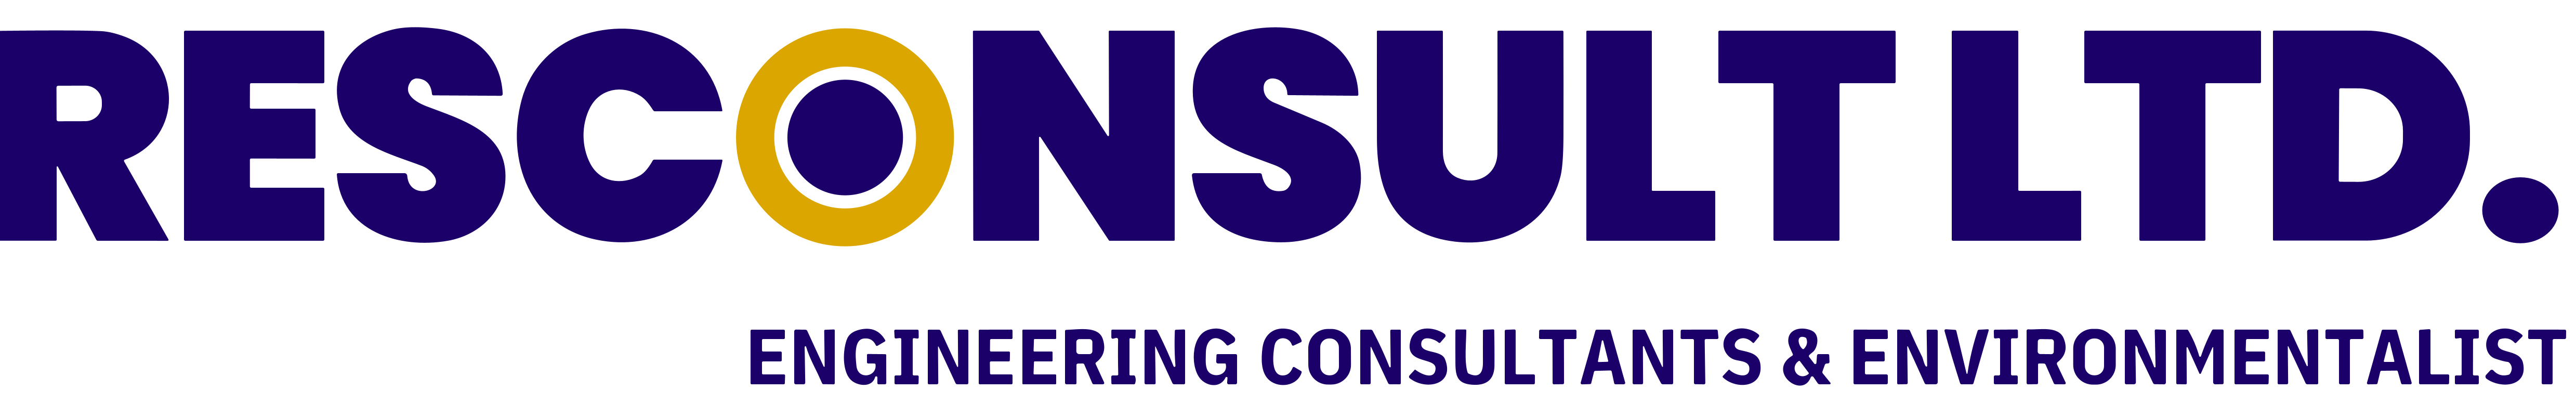 Resconsult Limited Logo Image